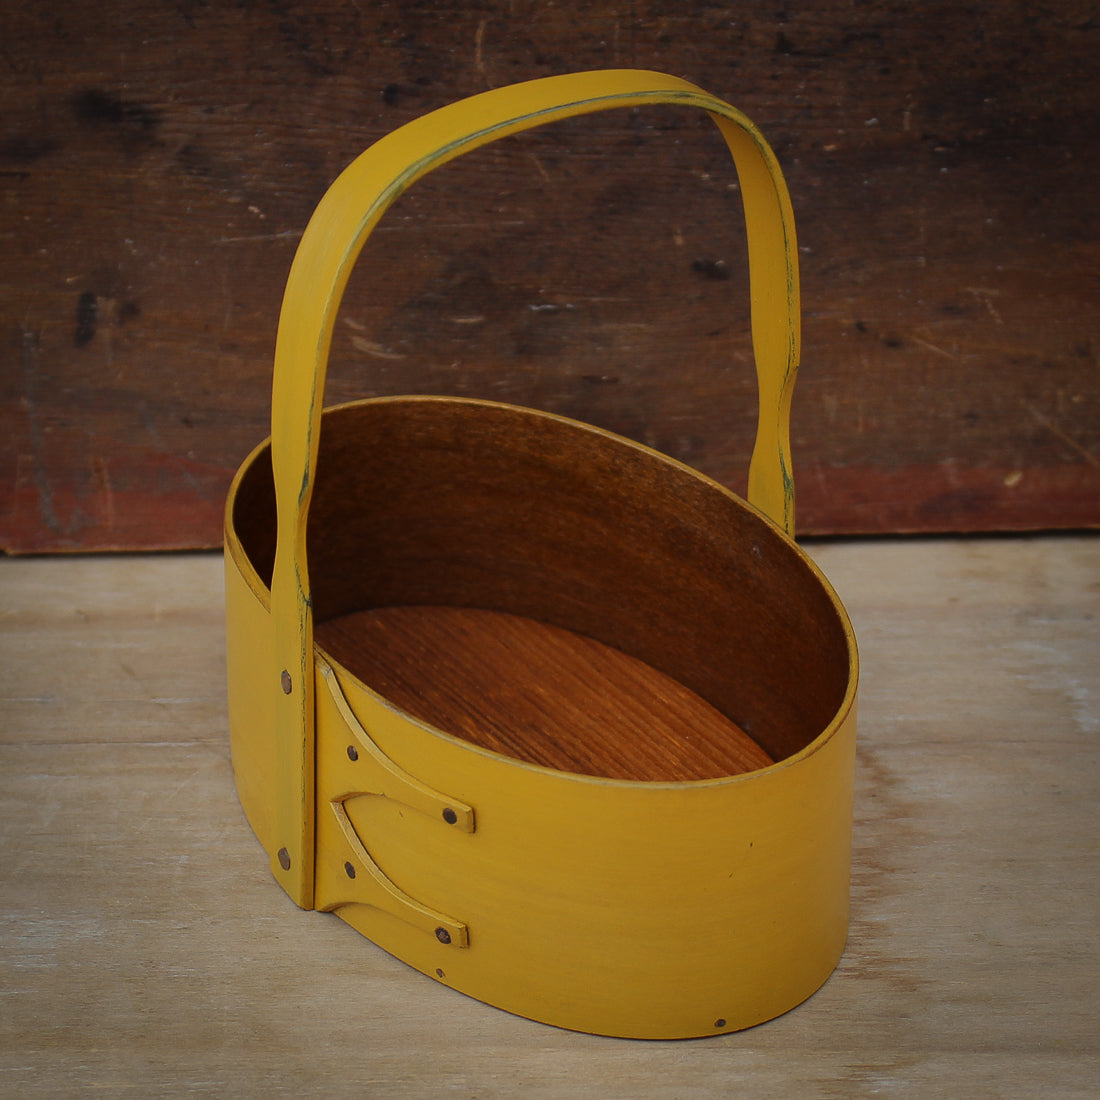 Shaker Carrier, Size #2, LeHays Shaker Boxes, Handcrafted in Maine.  Yellow Milk Paint Finish, Side View